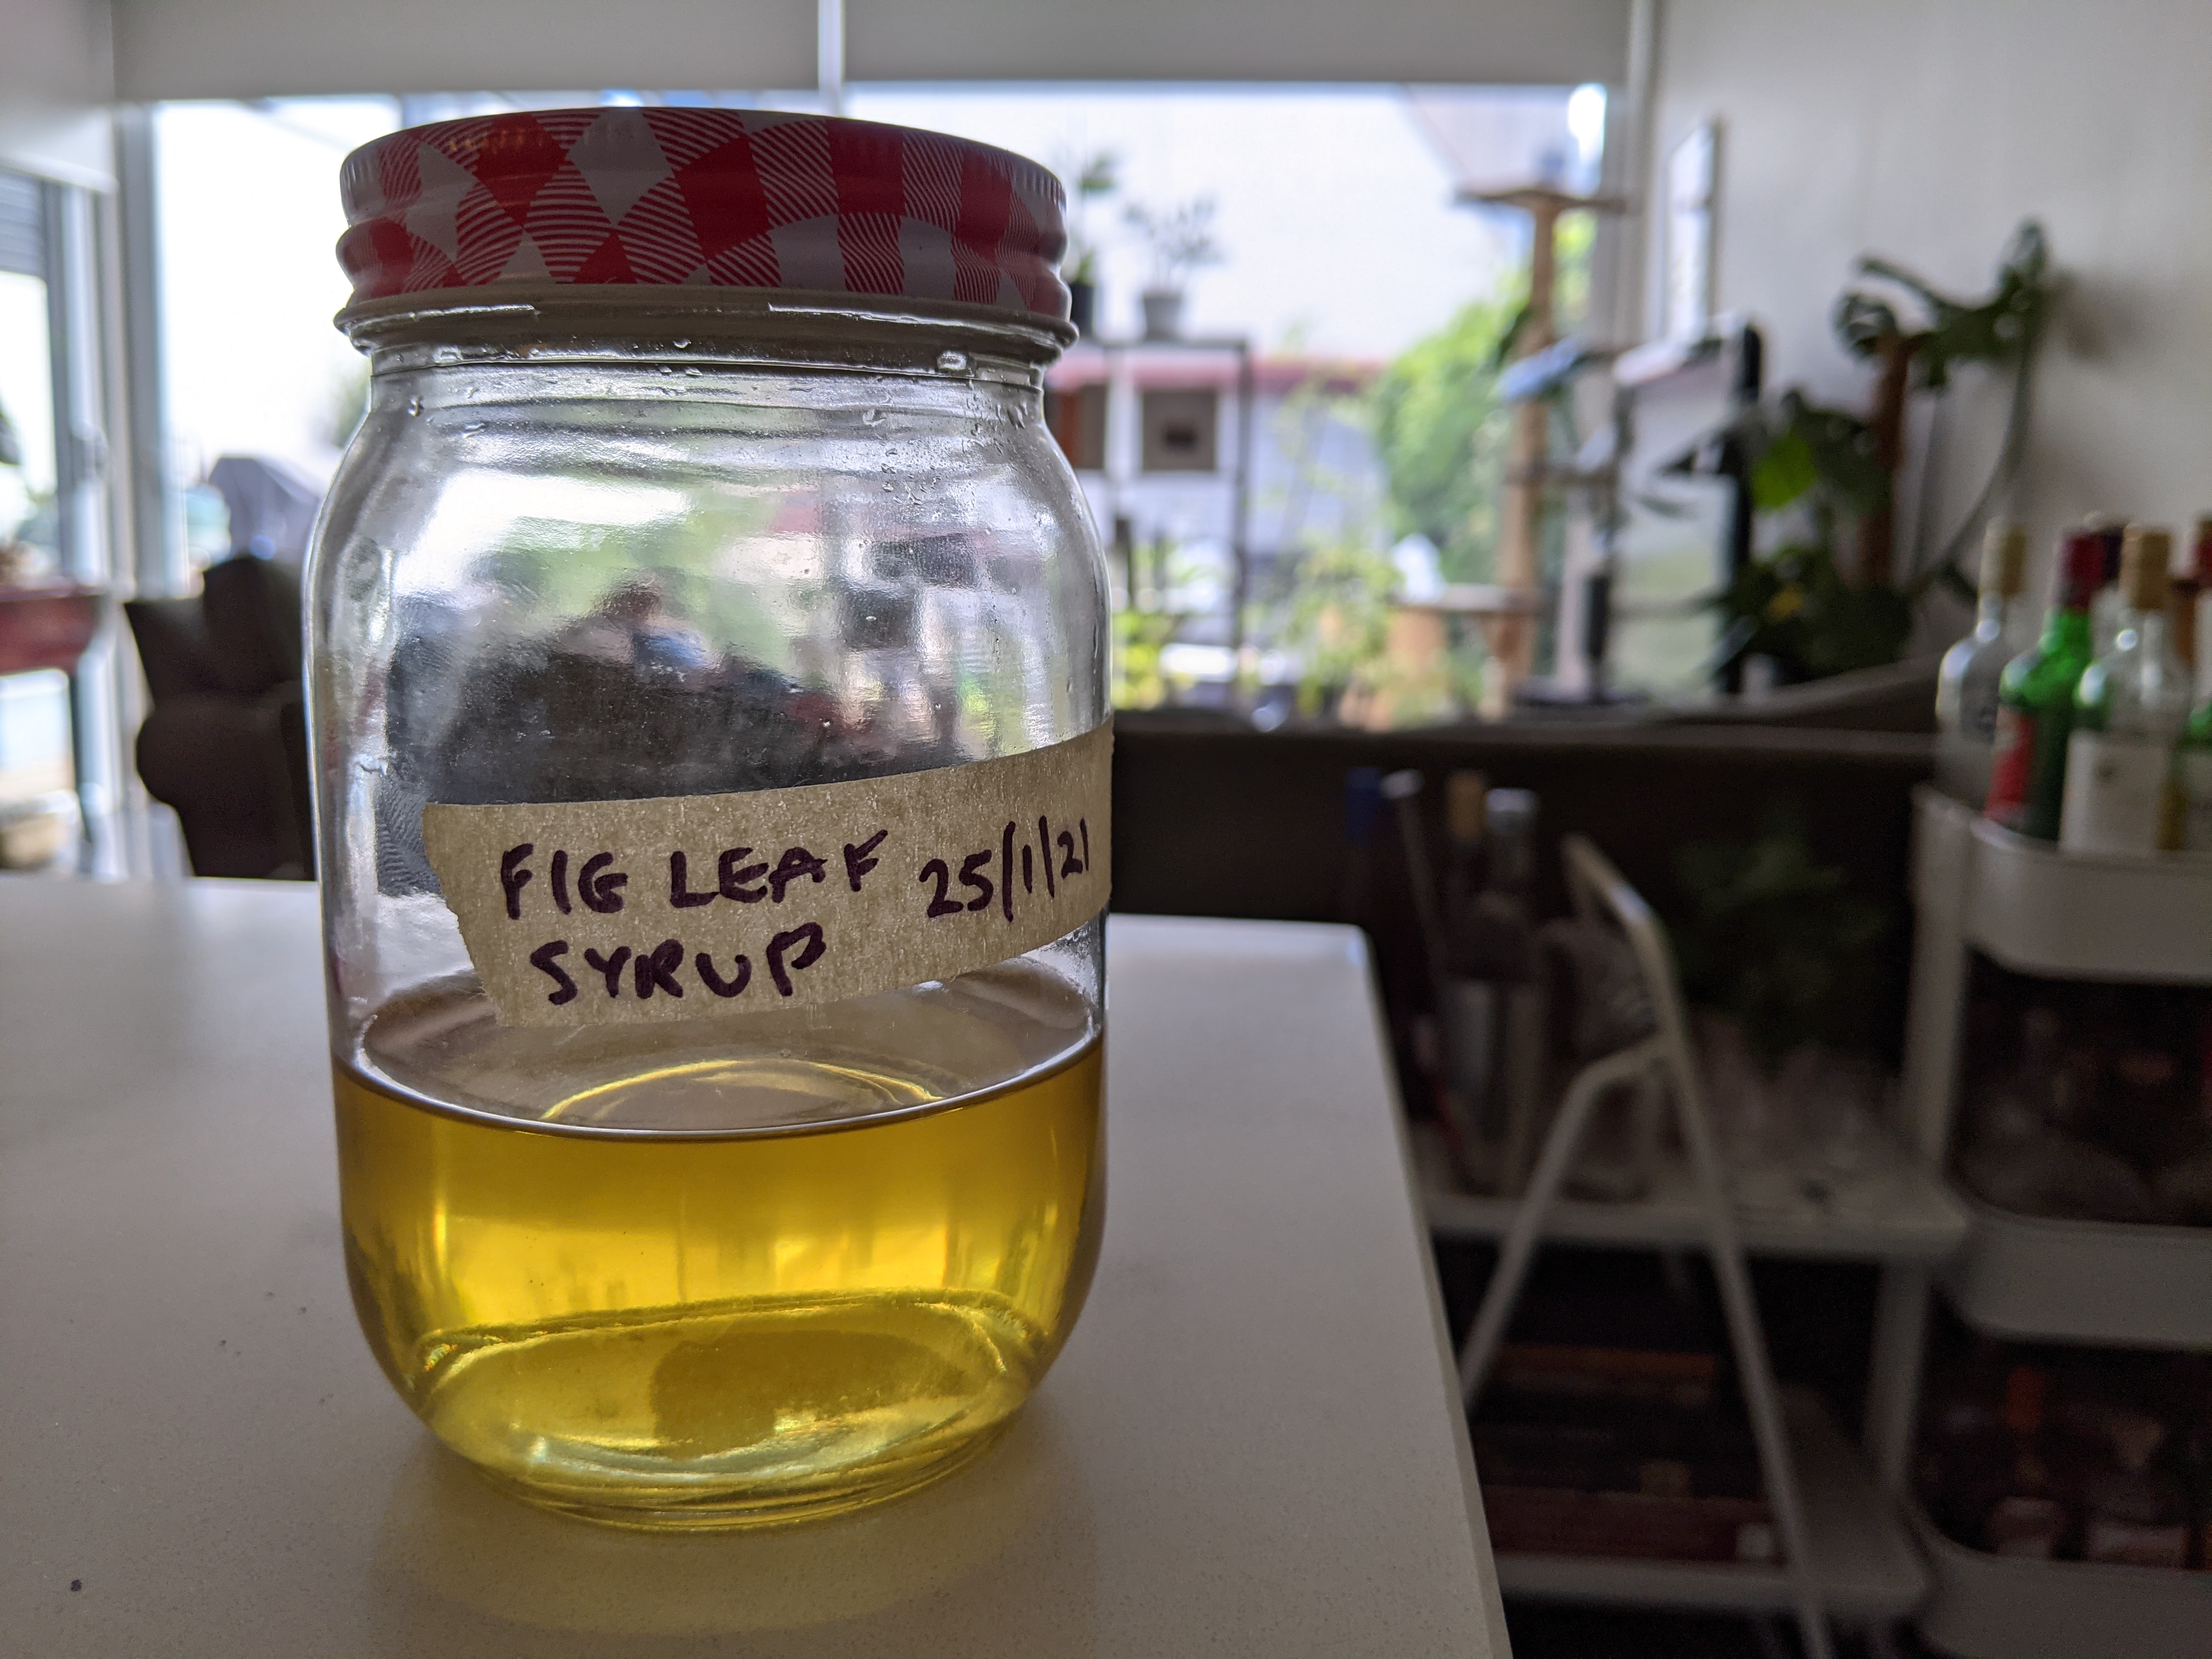 A small jar with a yellow-colored syrup in it, sitting on a stone countertop